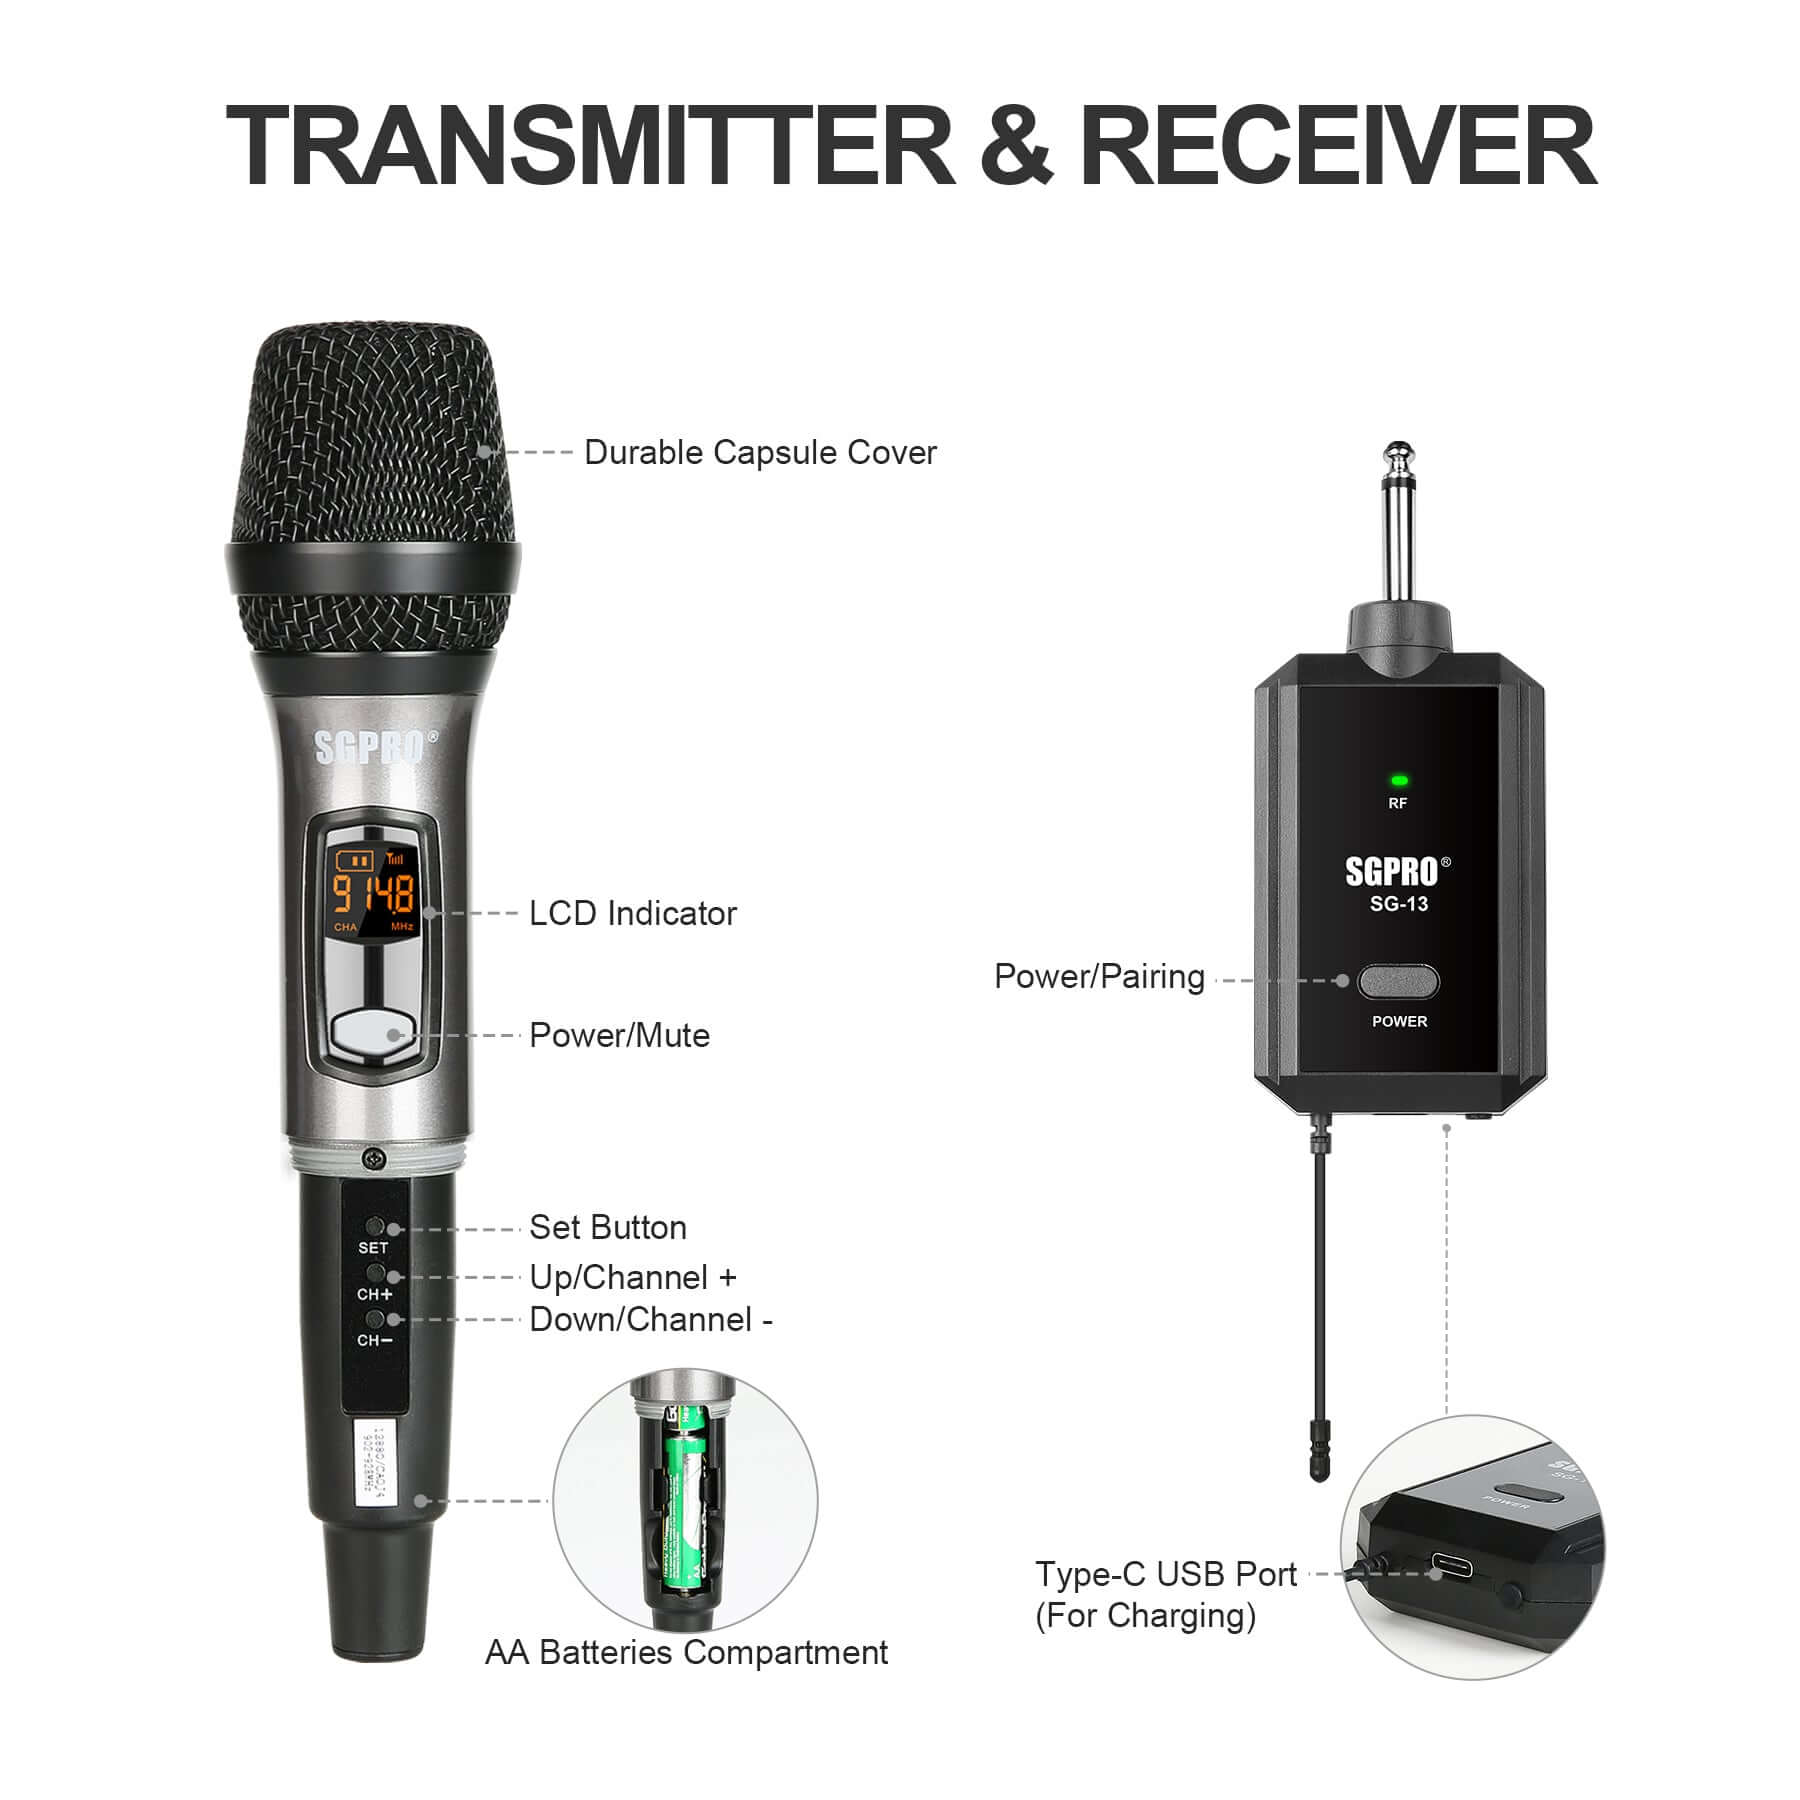 Wireless PRO, Compact Wireless Microphone System